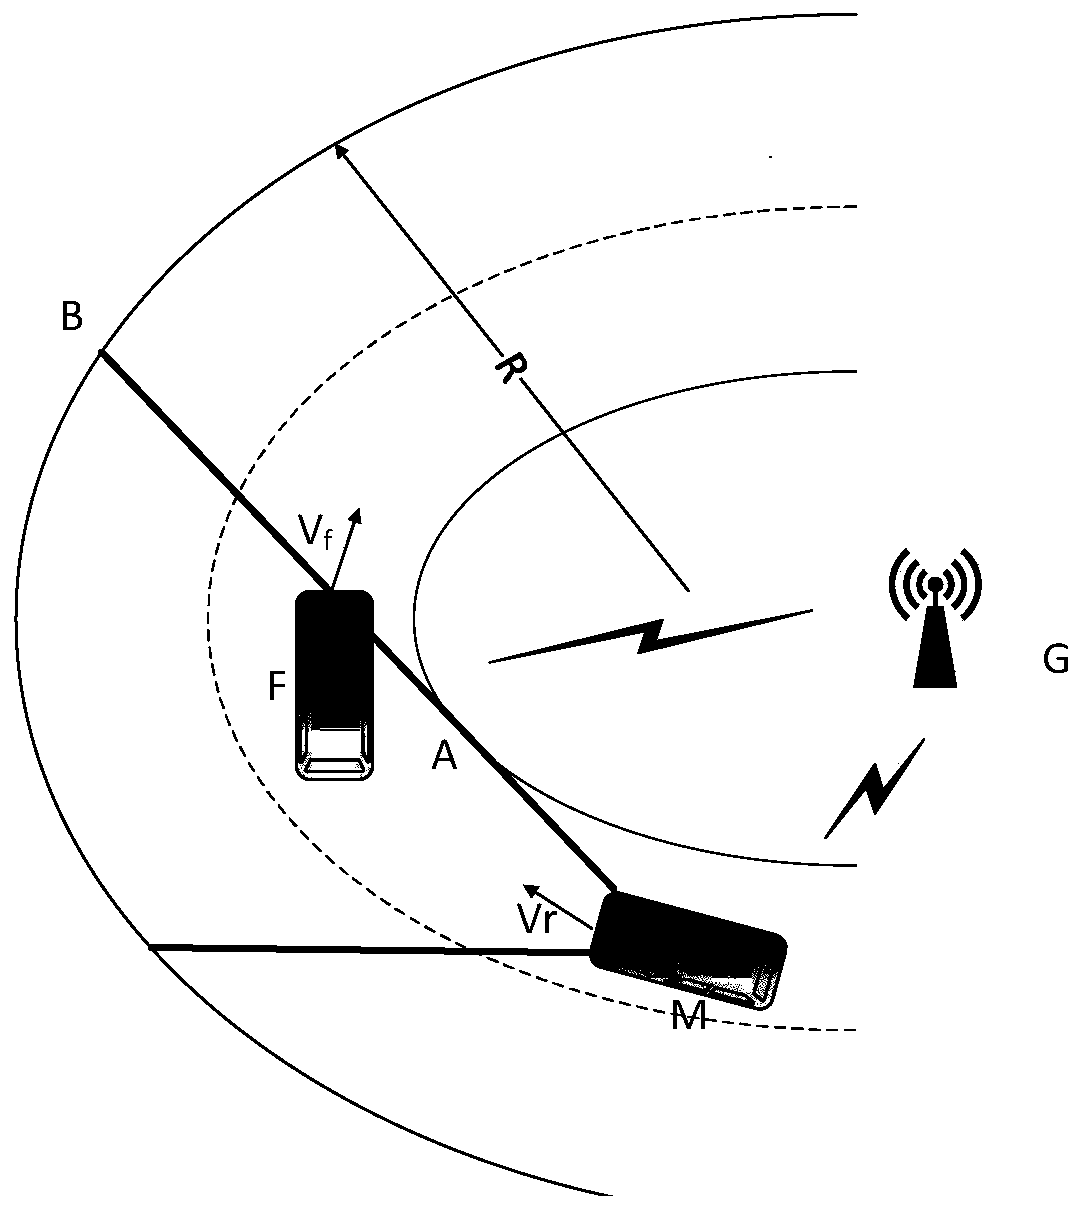 Automobile curve blind zone following control method based on Internet of automobiles